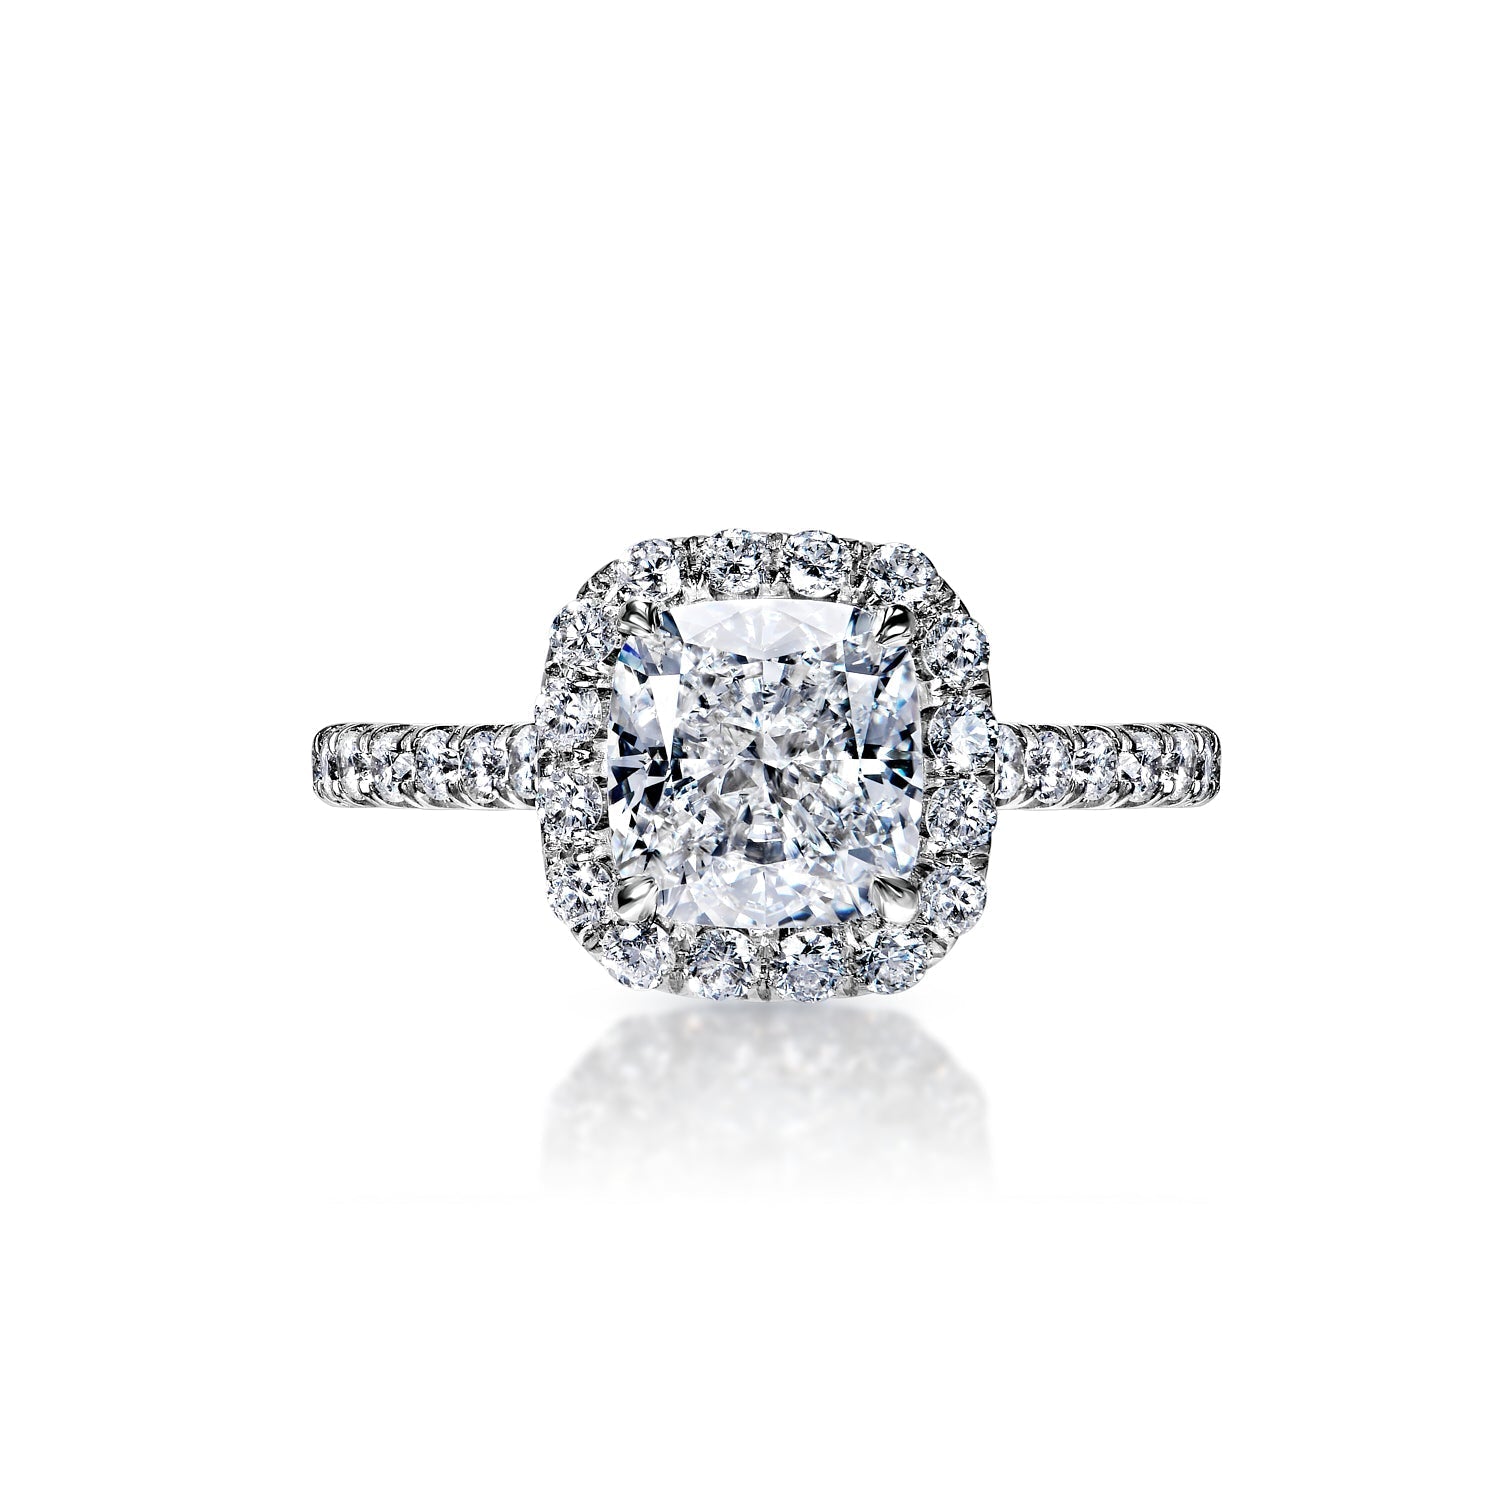 Mallory 3 Carat E VS2 Cushion Cut Diamond Engagement Ring in Platinum Front View